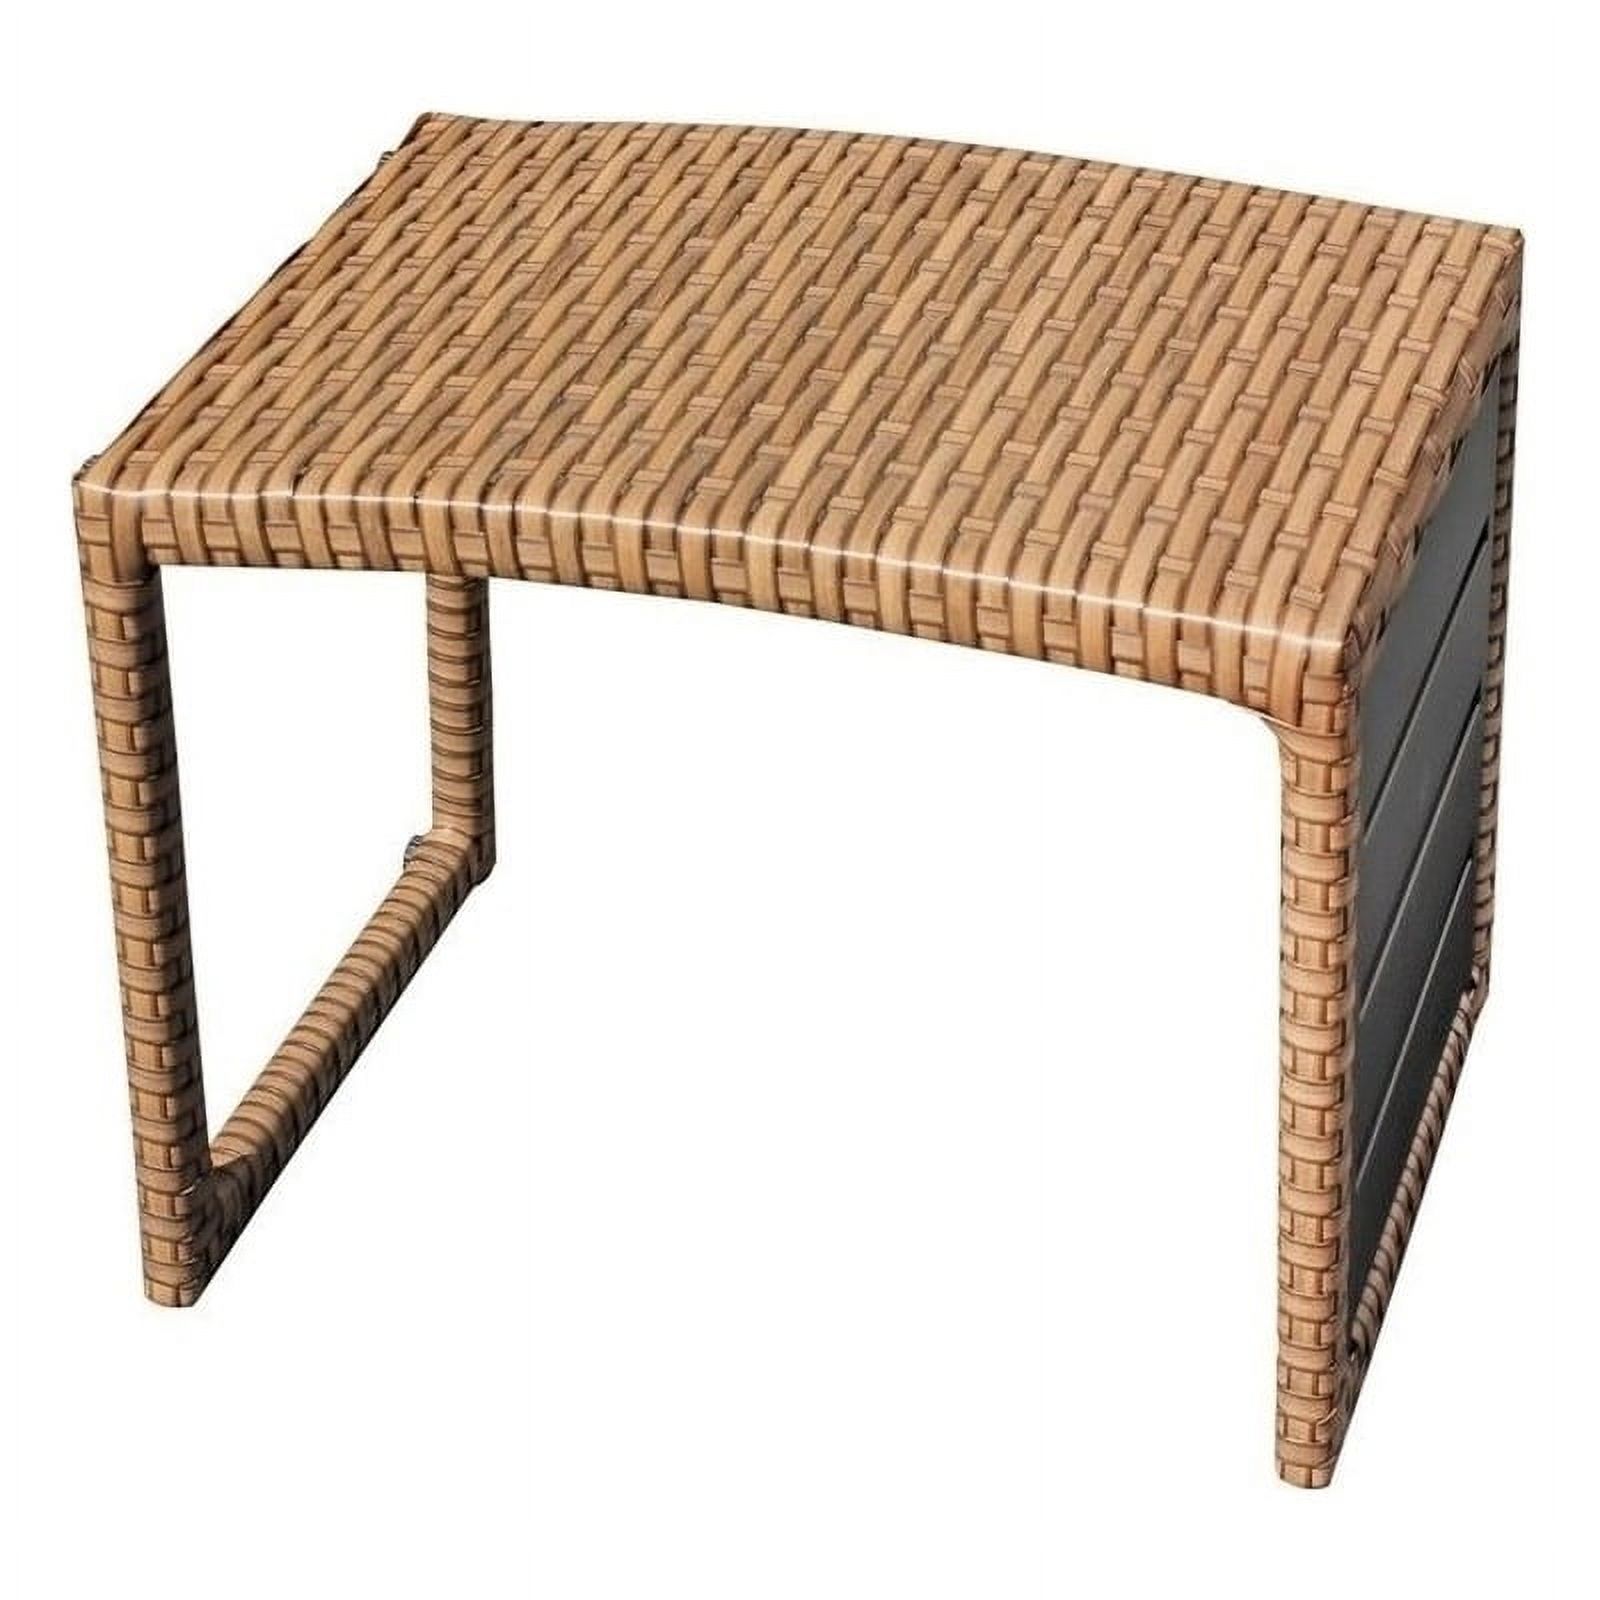 Bowery Hill Transitional Wicker / Rattan Outdoor Side Table in Caramel - image 1 of 3